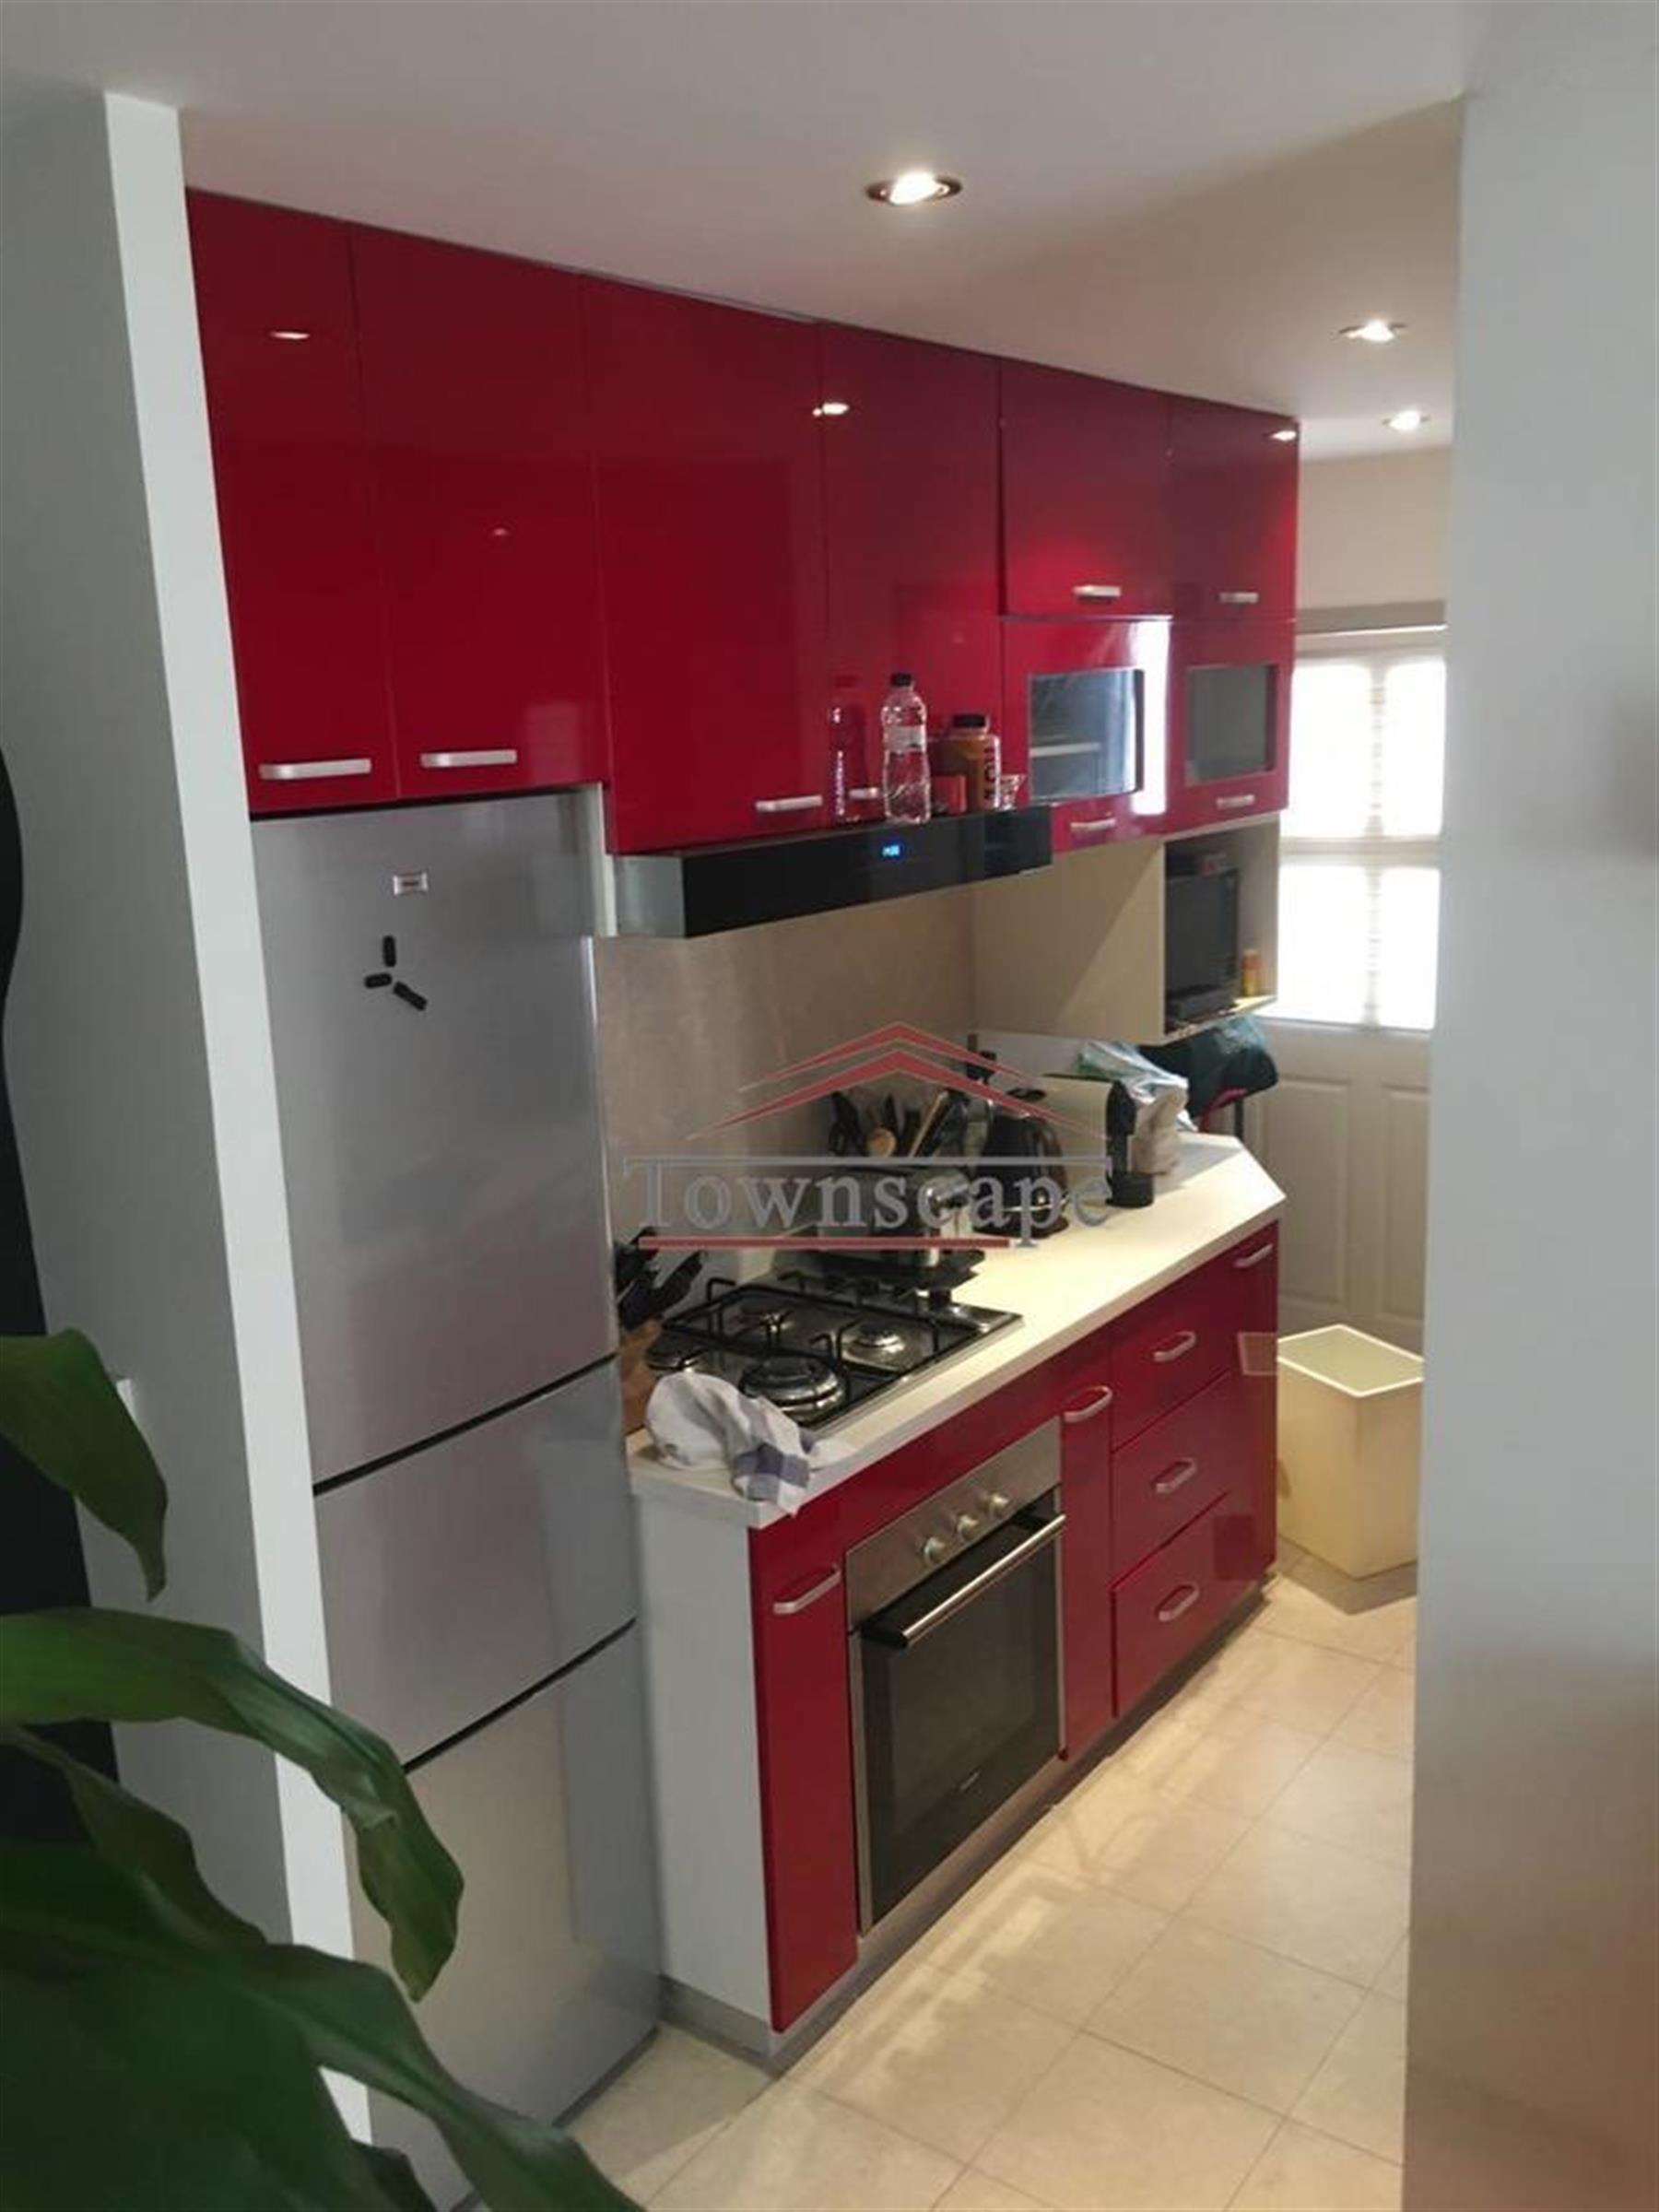 Open Kitchen Comfy Ergo-designed Spacious 2BR Yongjia Rd Apartment for Rent in Shanghai